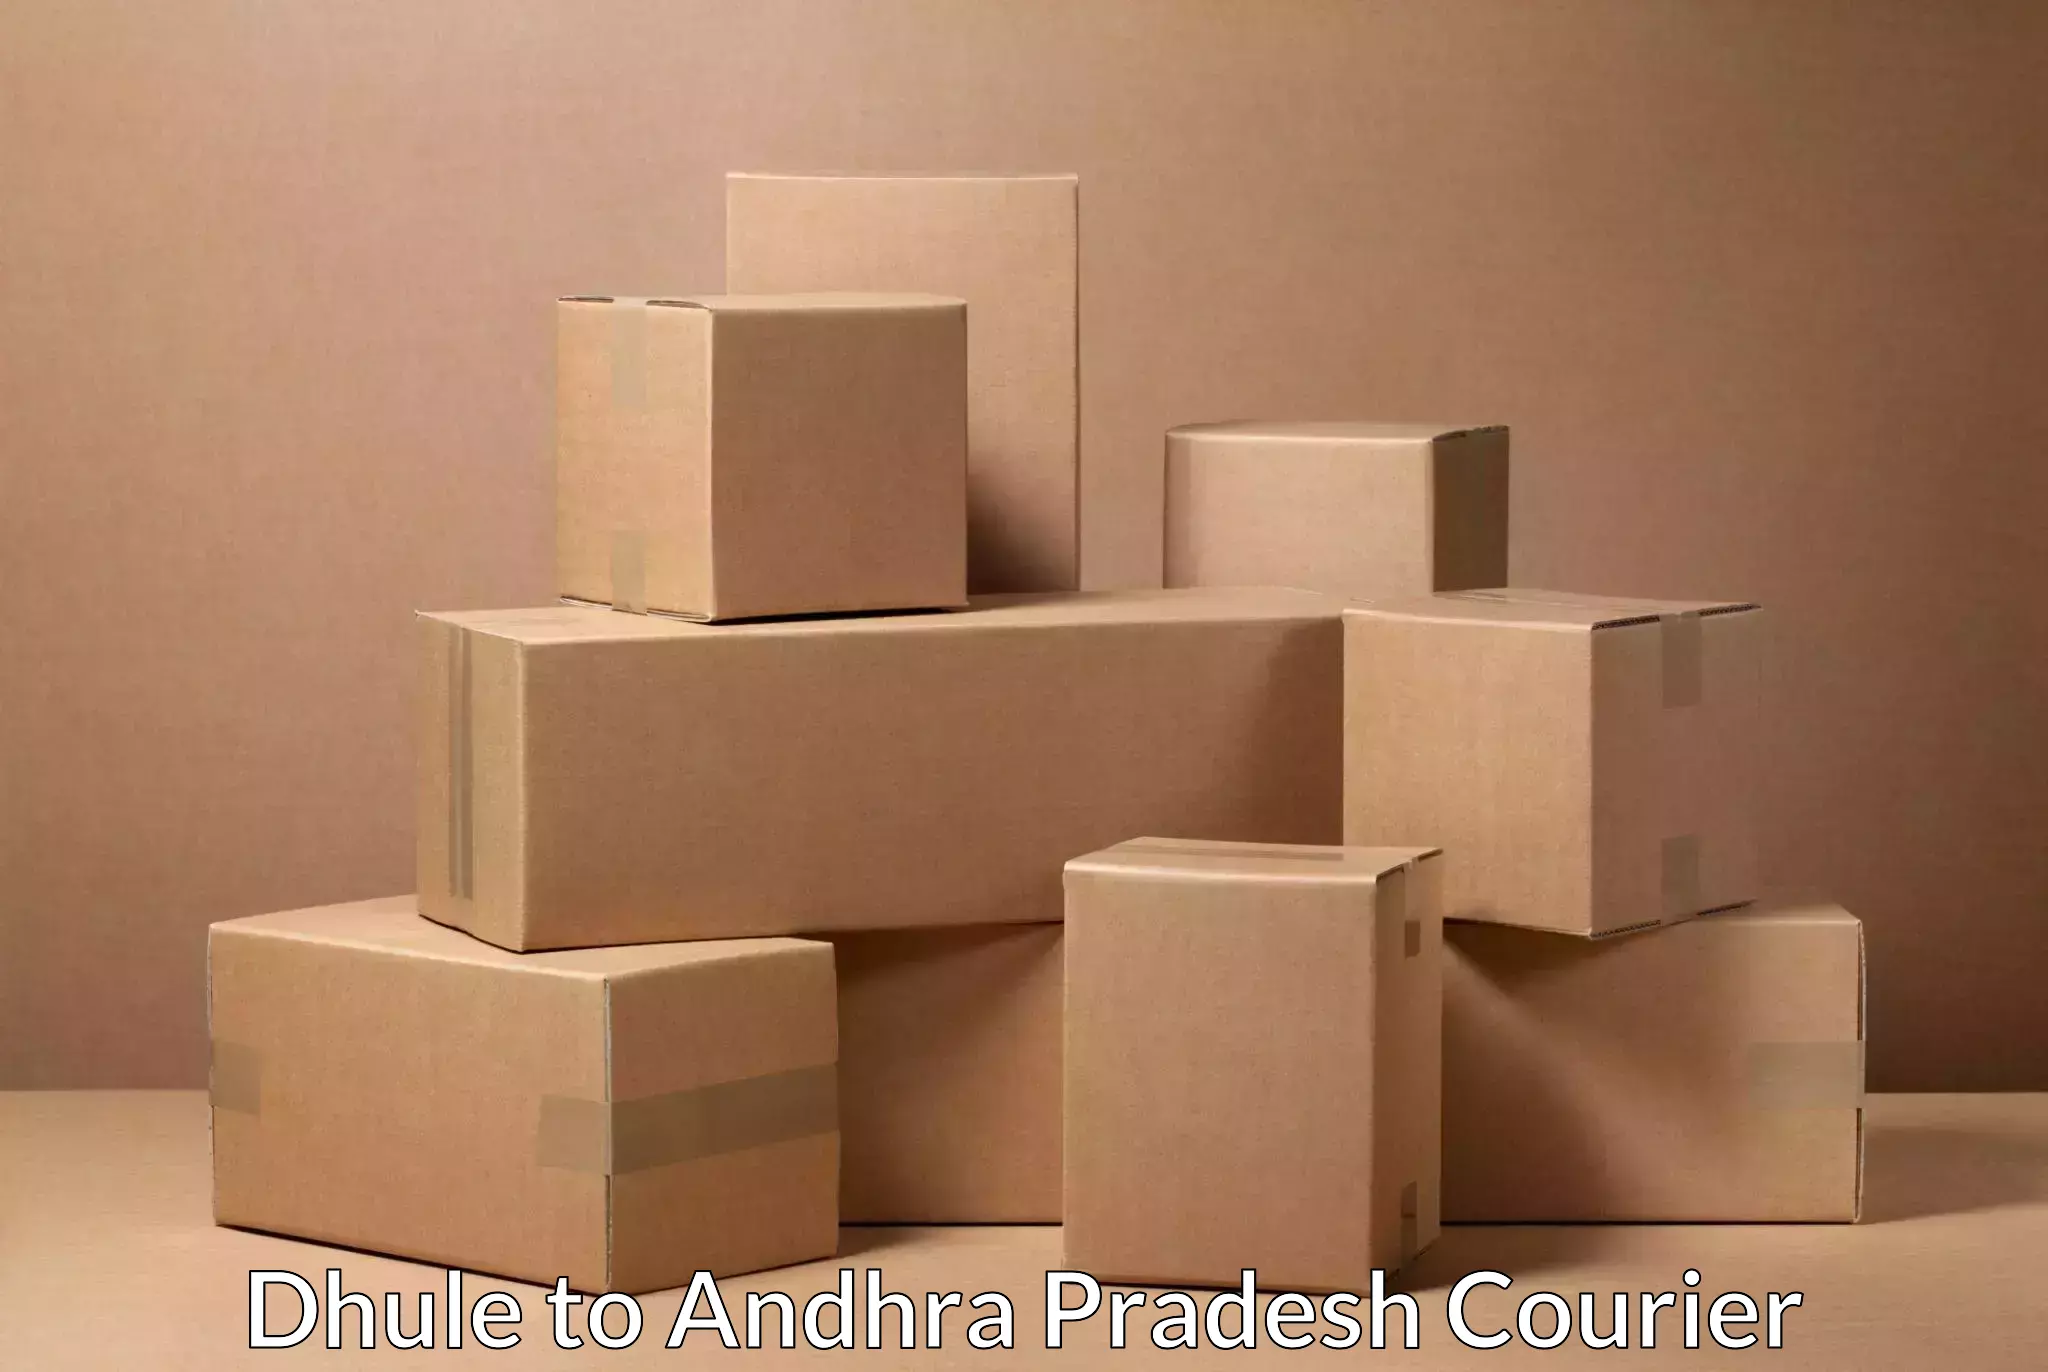 Multi-national courier services Dhule to Andhra Pradesh